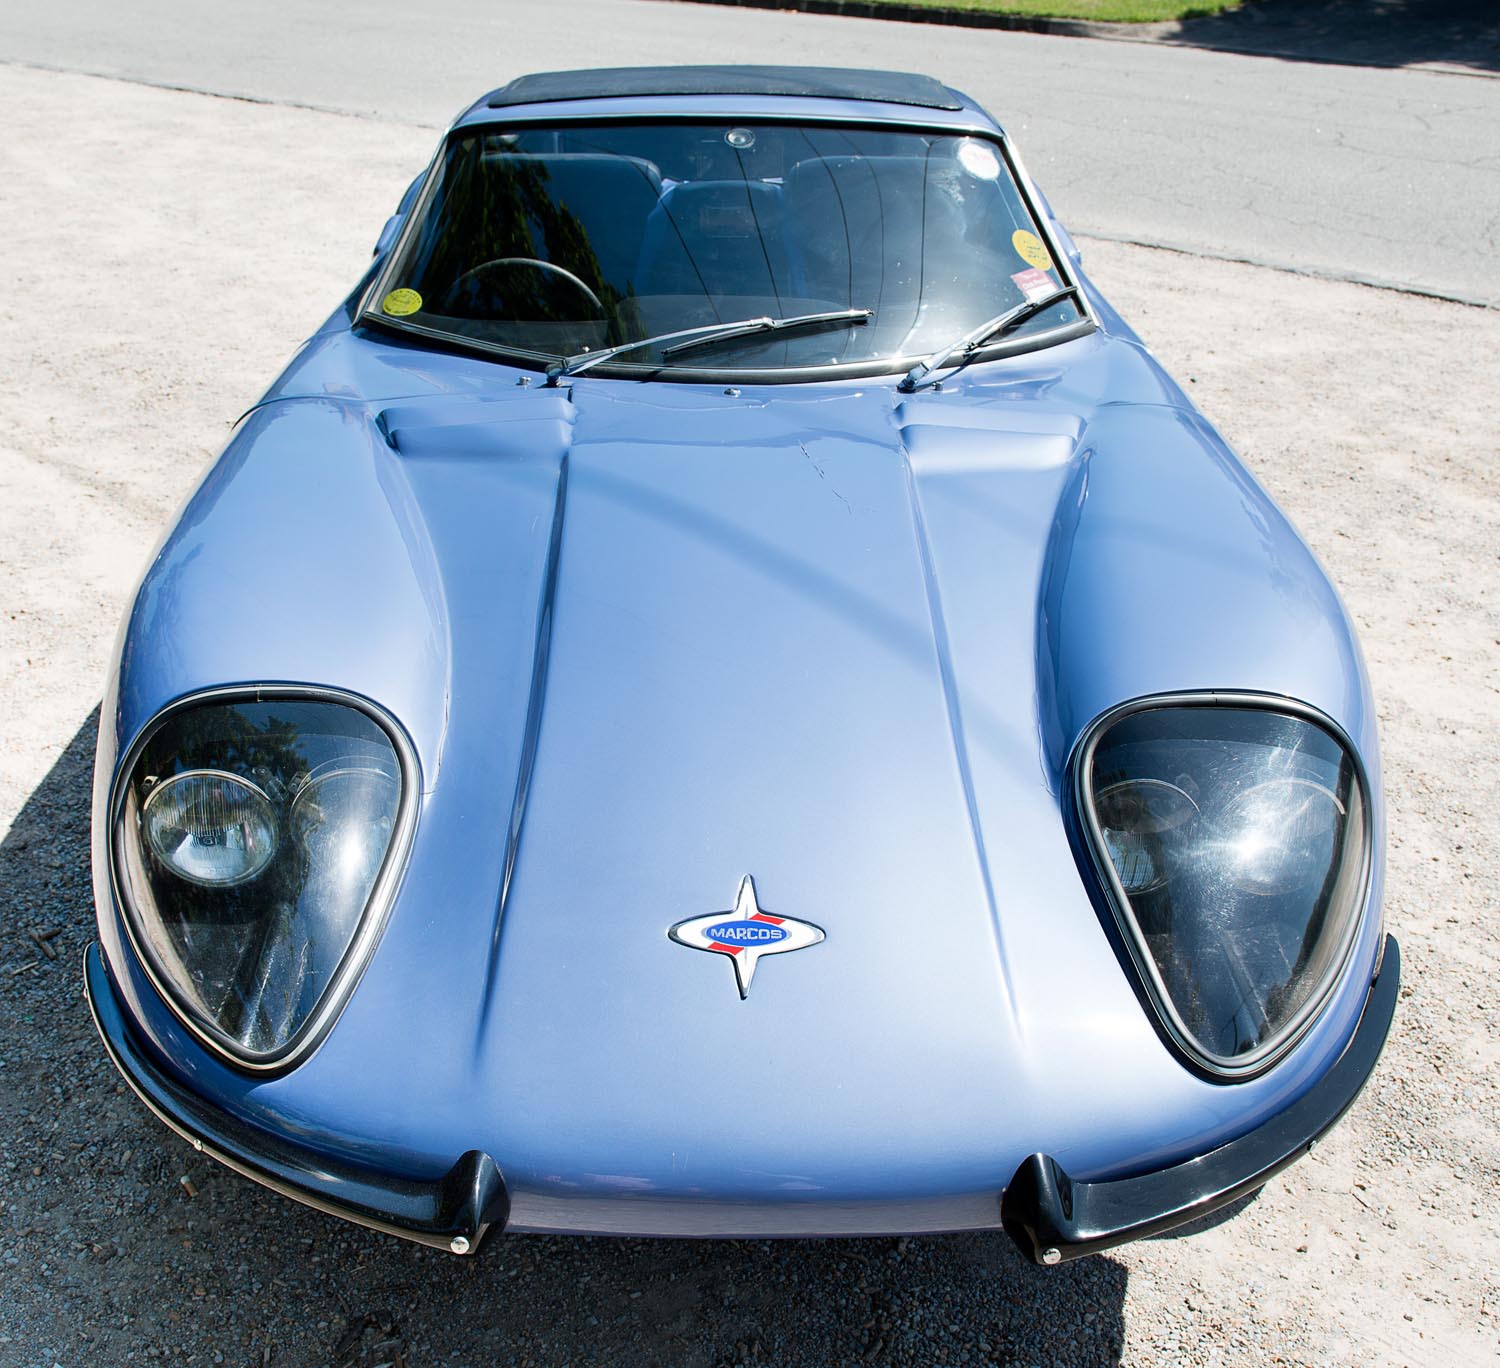 1967 Marcos 1650 GT Lawrence-tune - Image 6 of 9